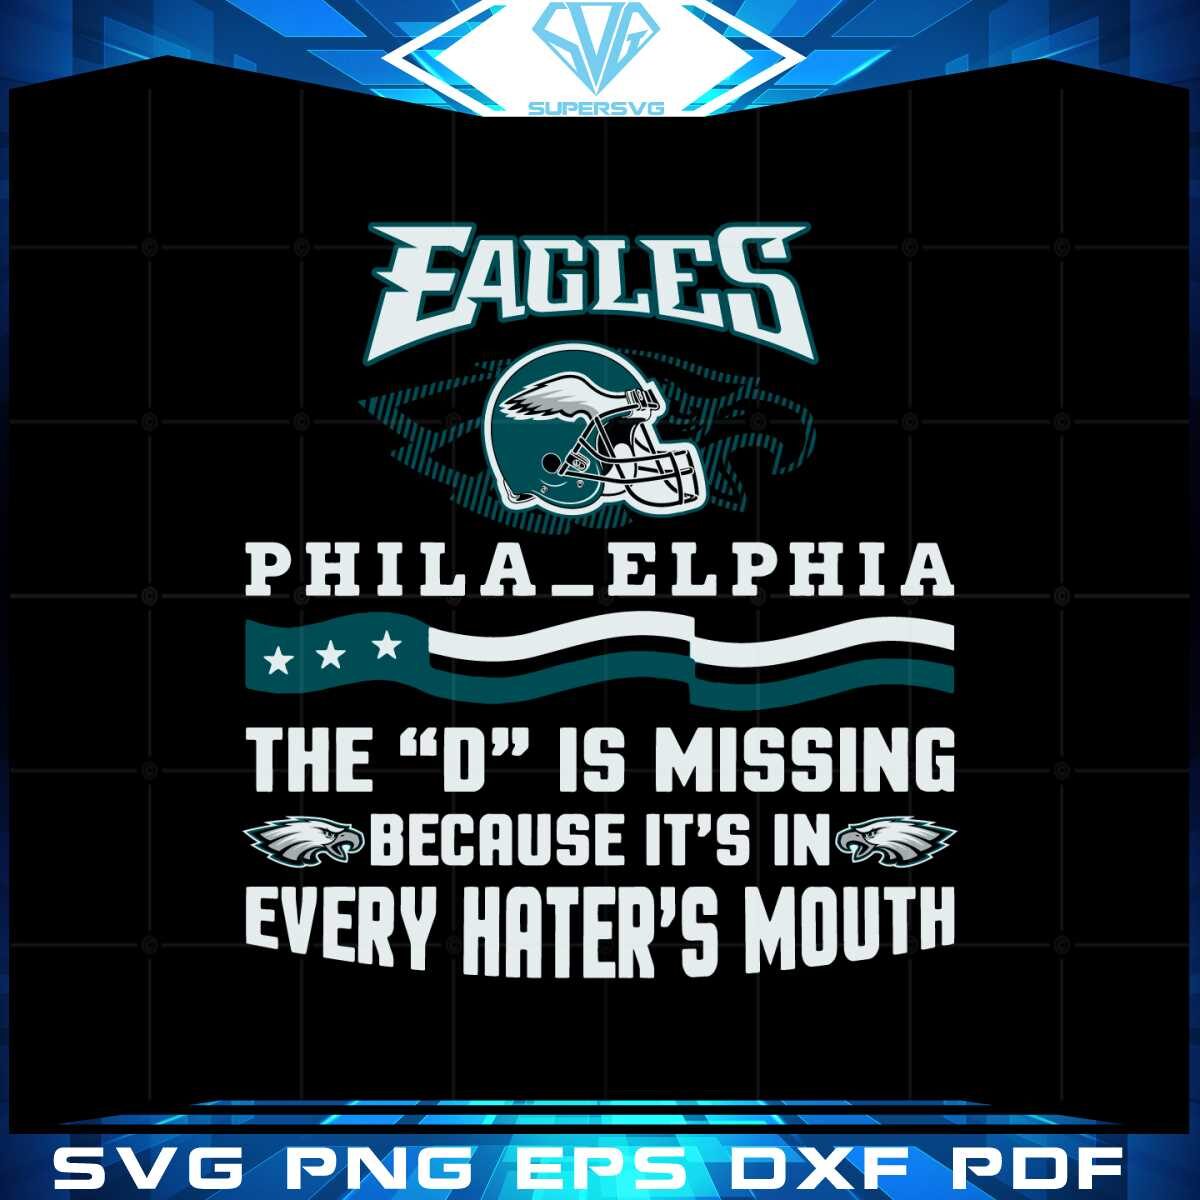 philadelphia-eagles-the-d-is-missing-because-its-in-every-haters-mouth-svg